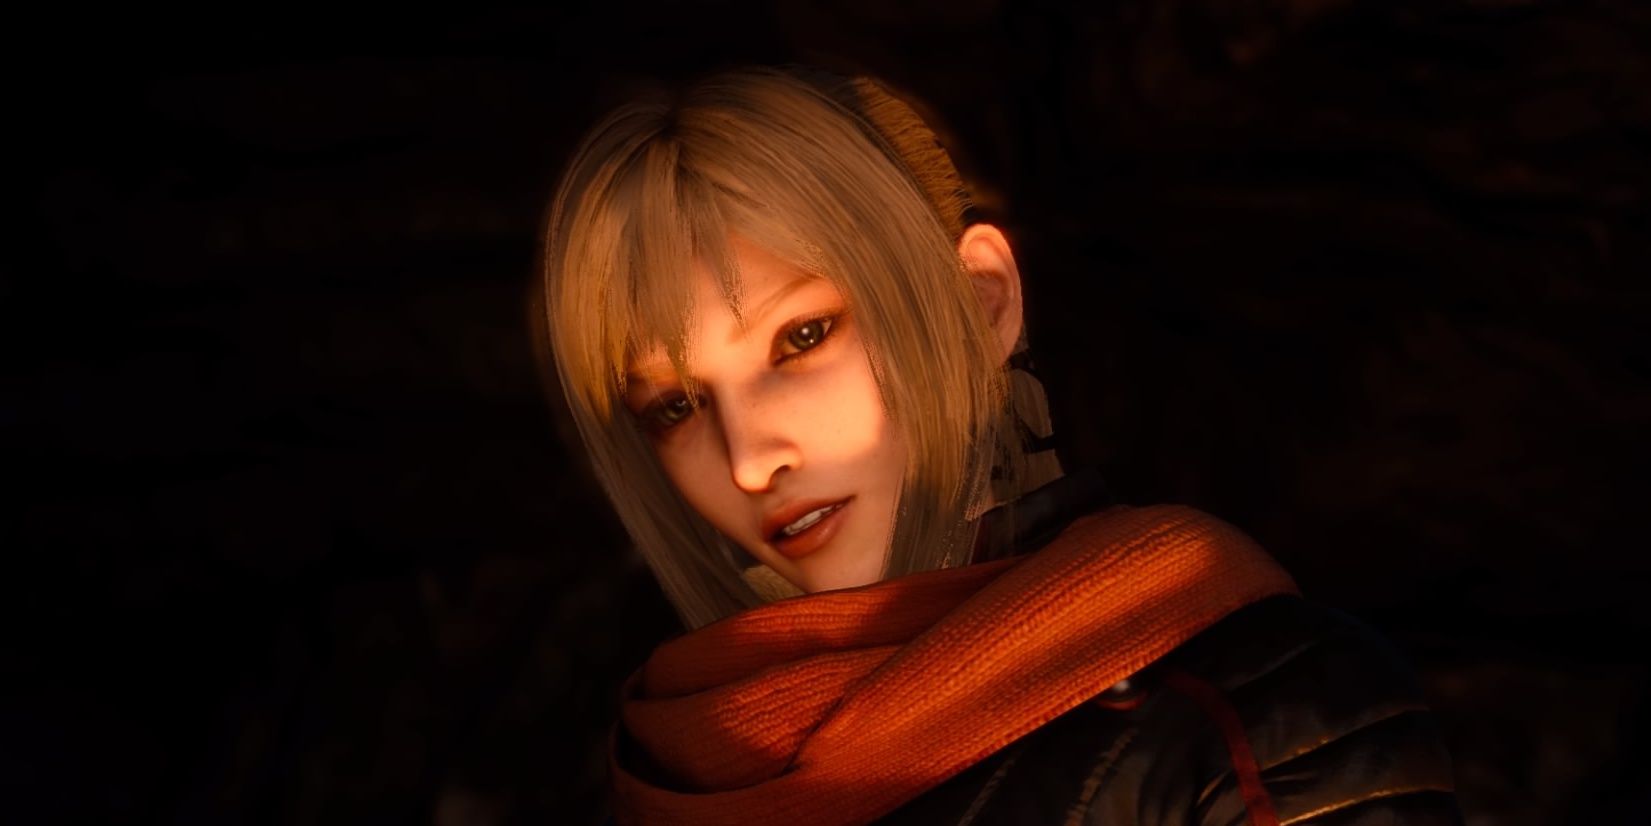 Final Fantasy XV 10 Things About Aranea Highwind Fans Never Knew.